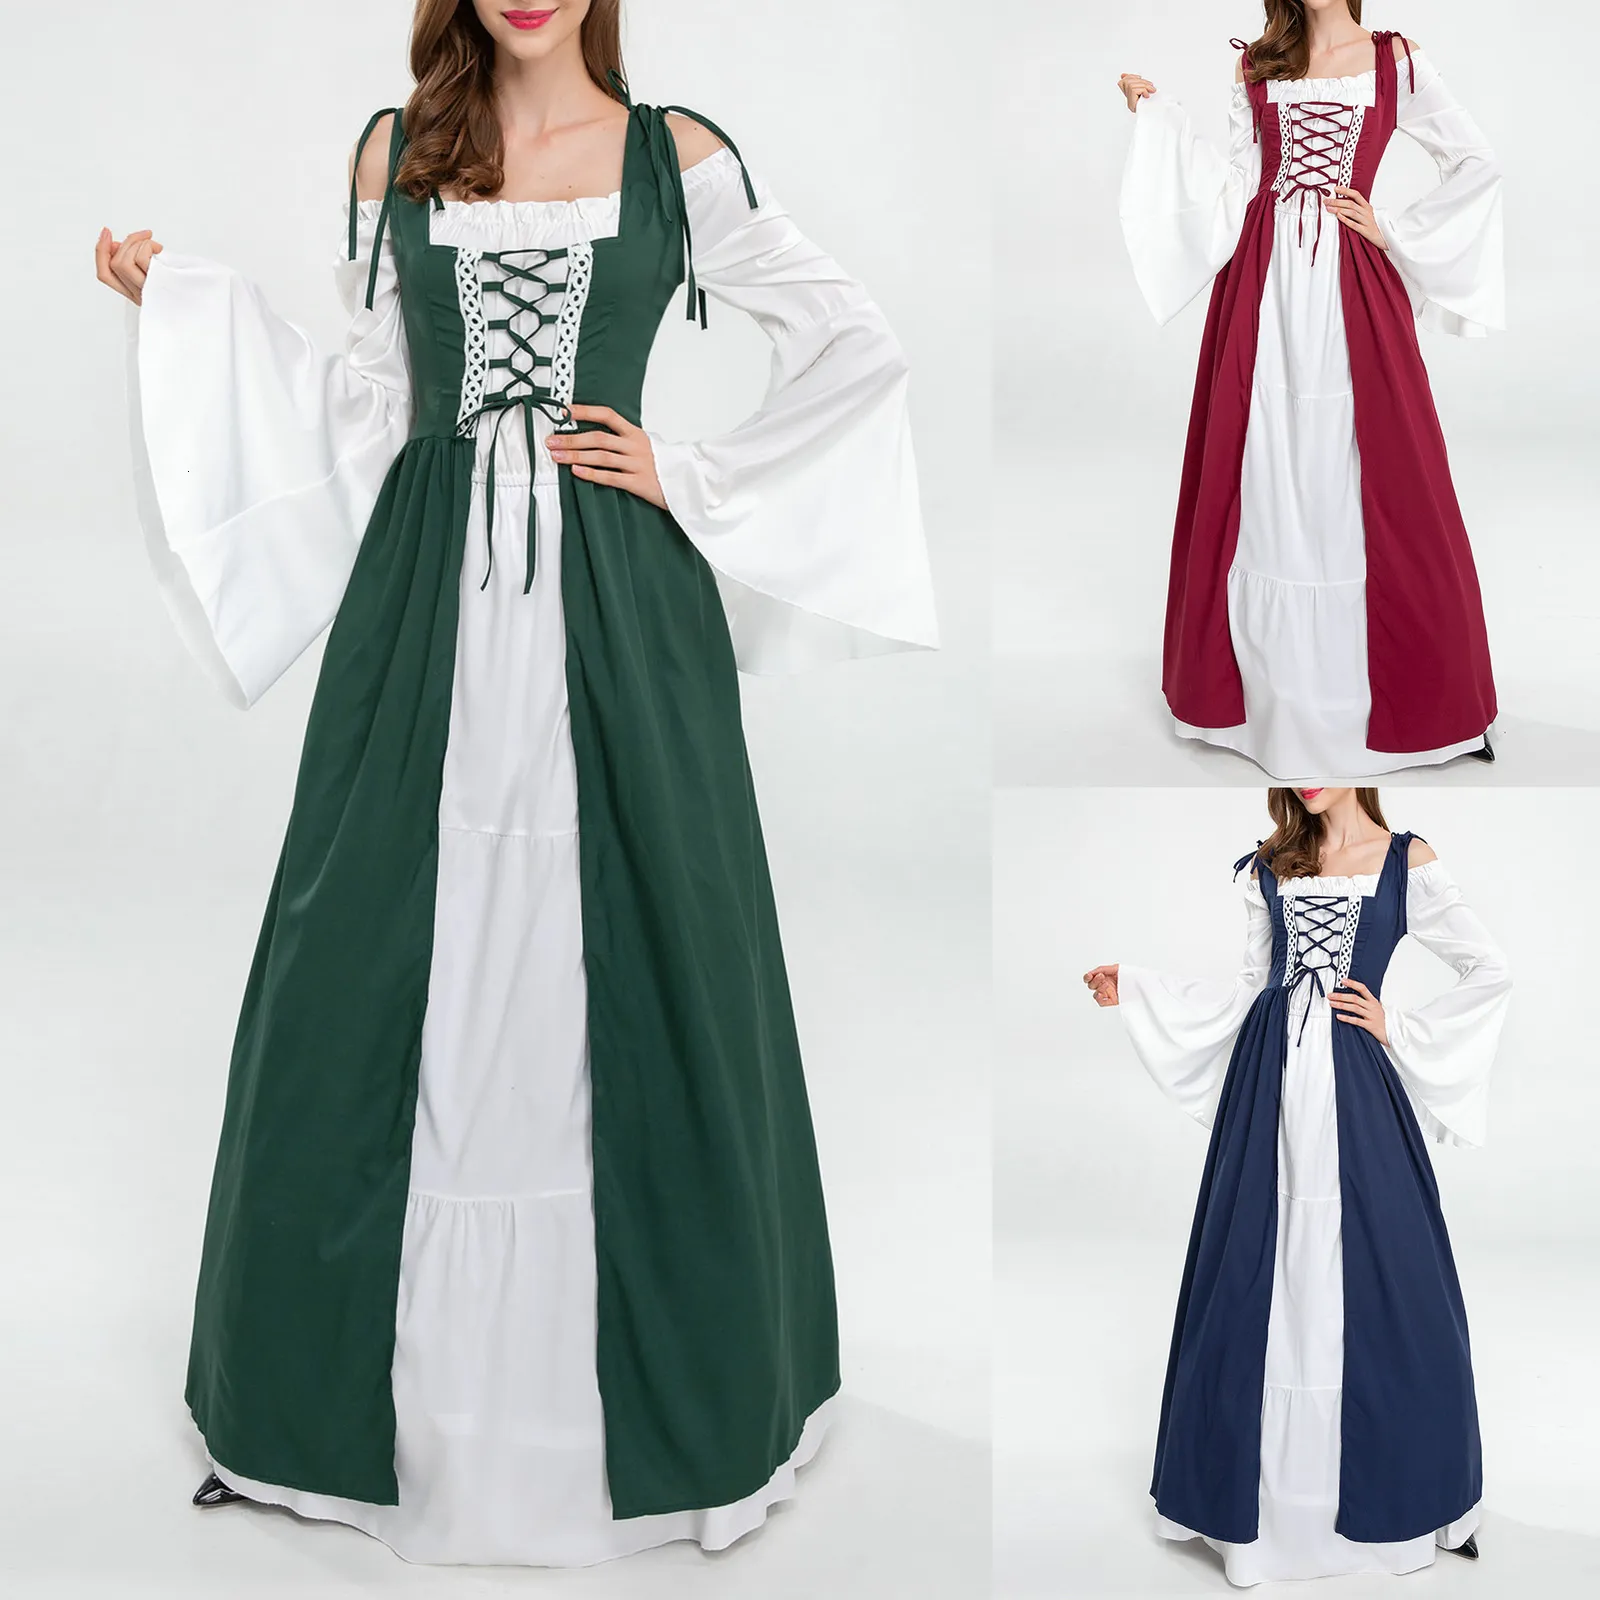 Off Shoulder Renaissance Maxi Dress Flare Sleeve Corset Style Drawstring  Medieval Dress For Women From Dou003, $11.76